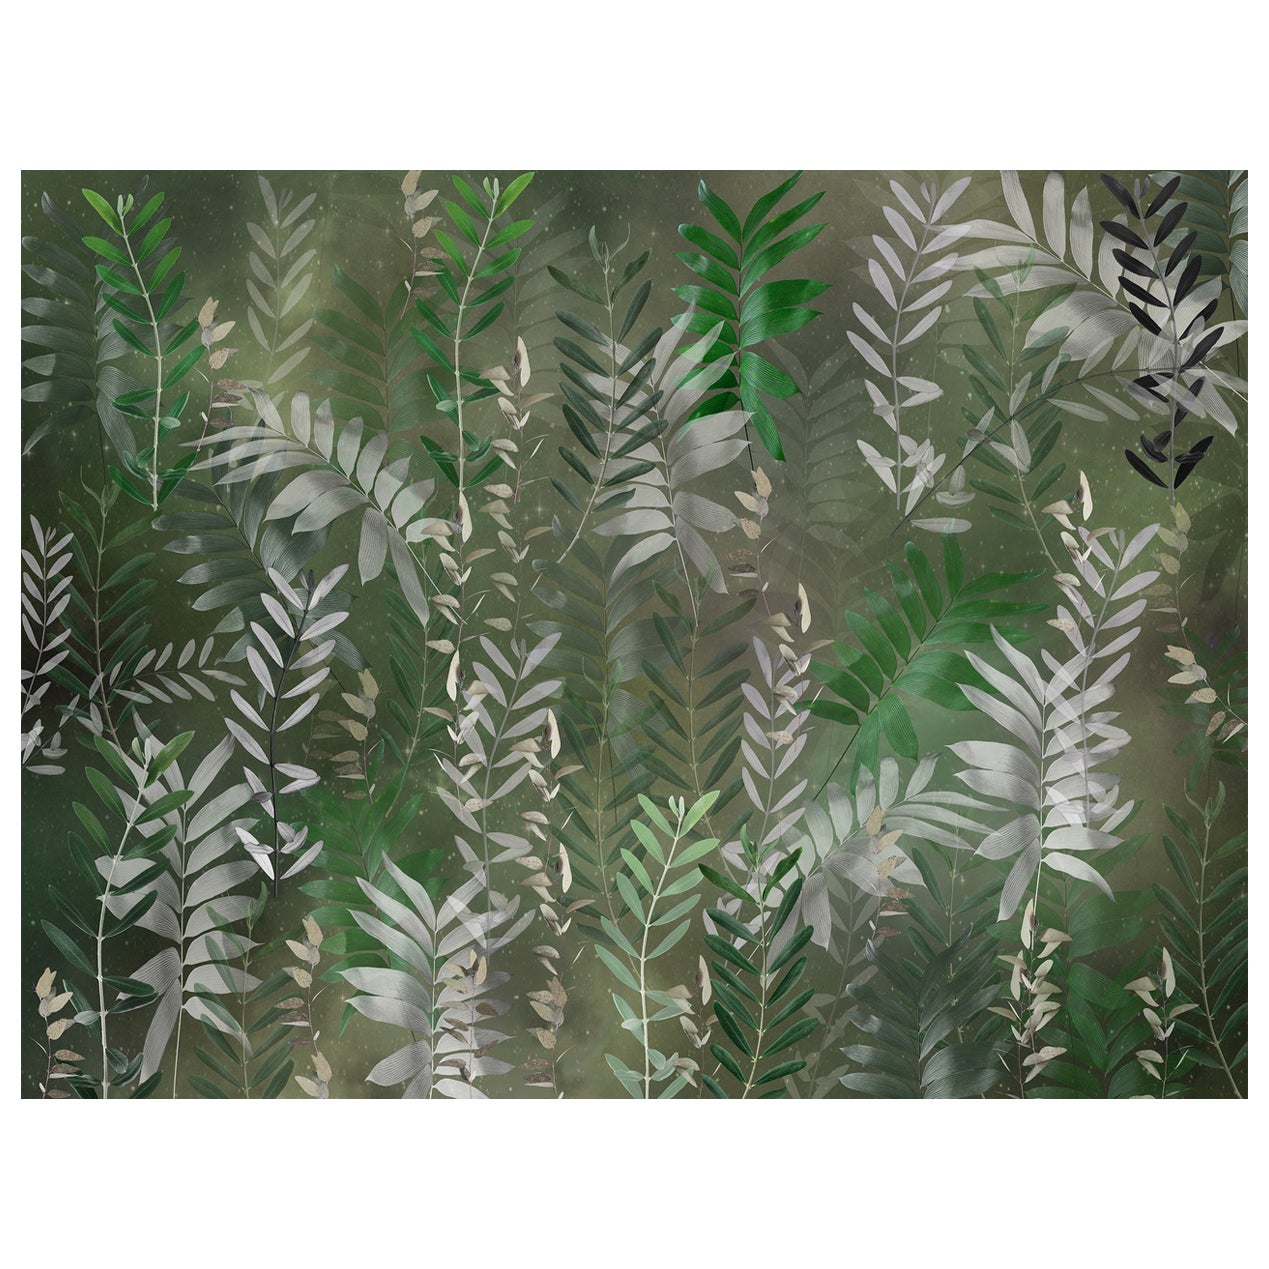 EDGE Collections Ferngully Evergreen Mural For Sale